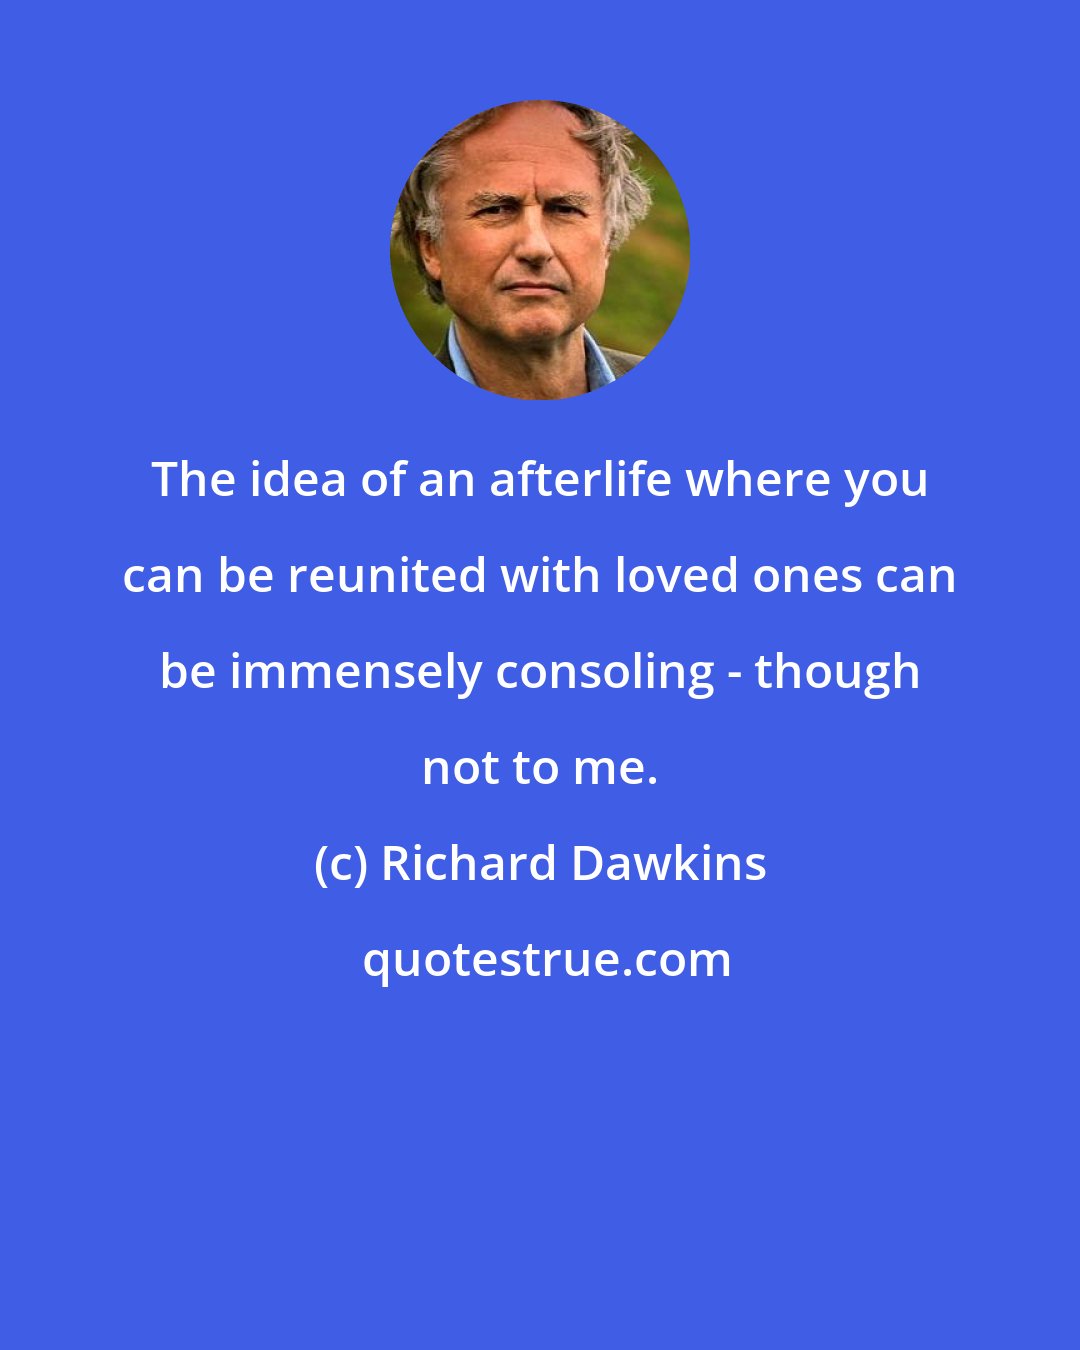 Richard Dawkins: The idea of an afterlife where you can be reunited with loved ones can be immensely consoling - though not to me.